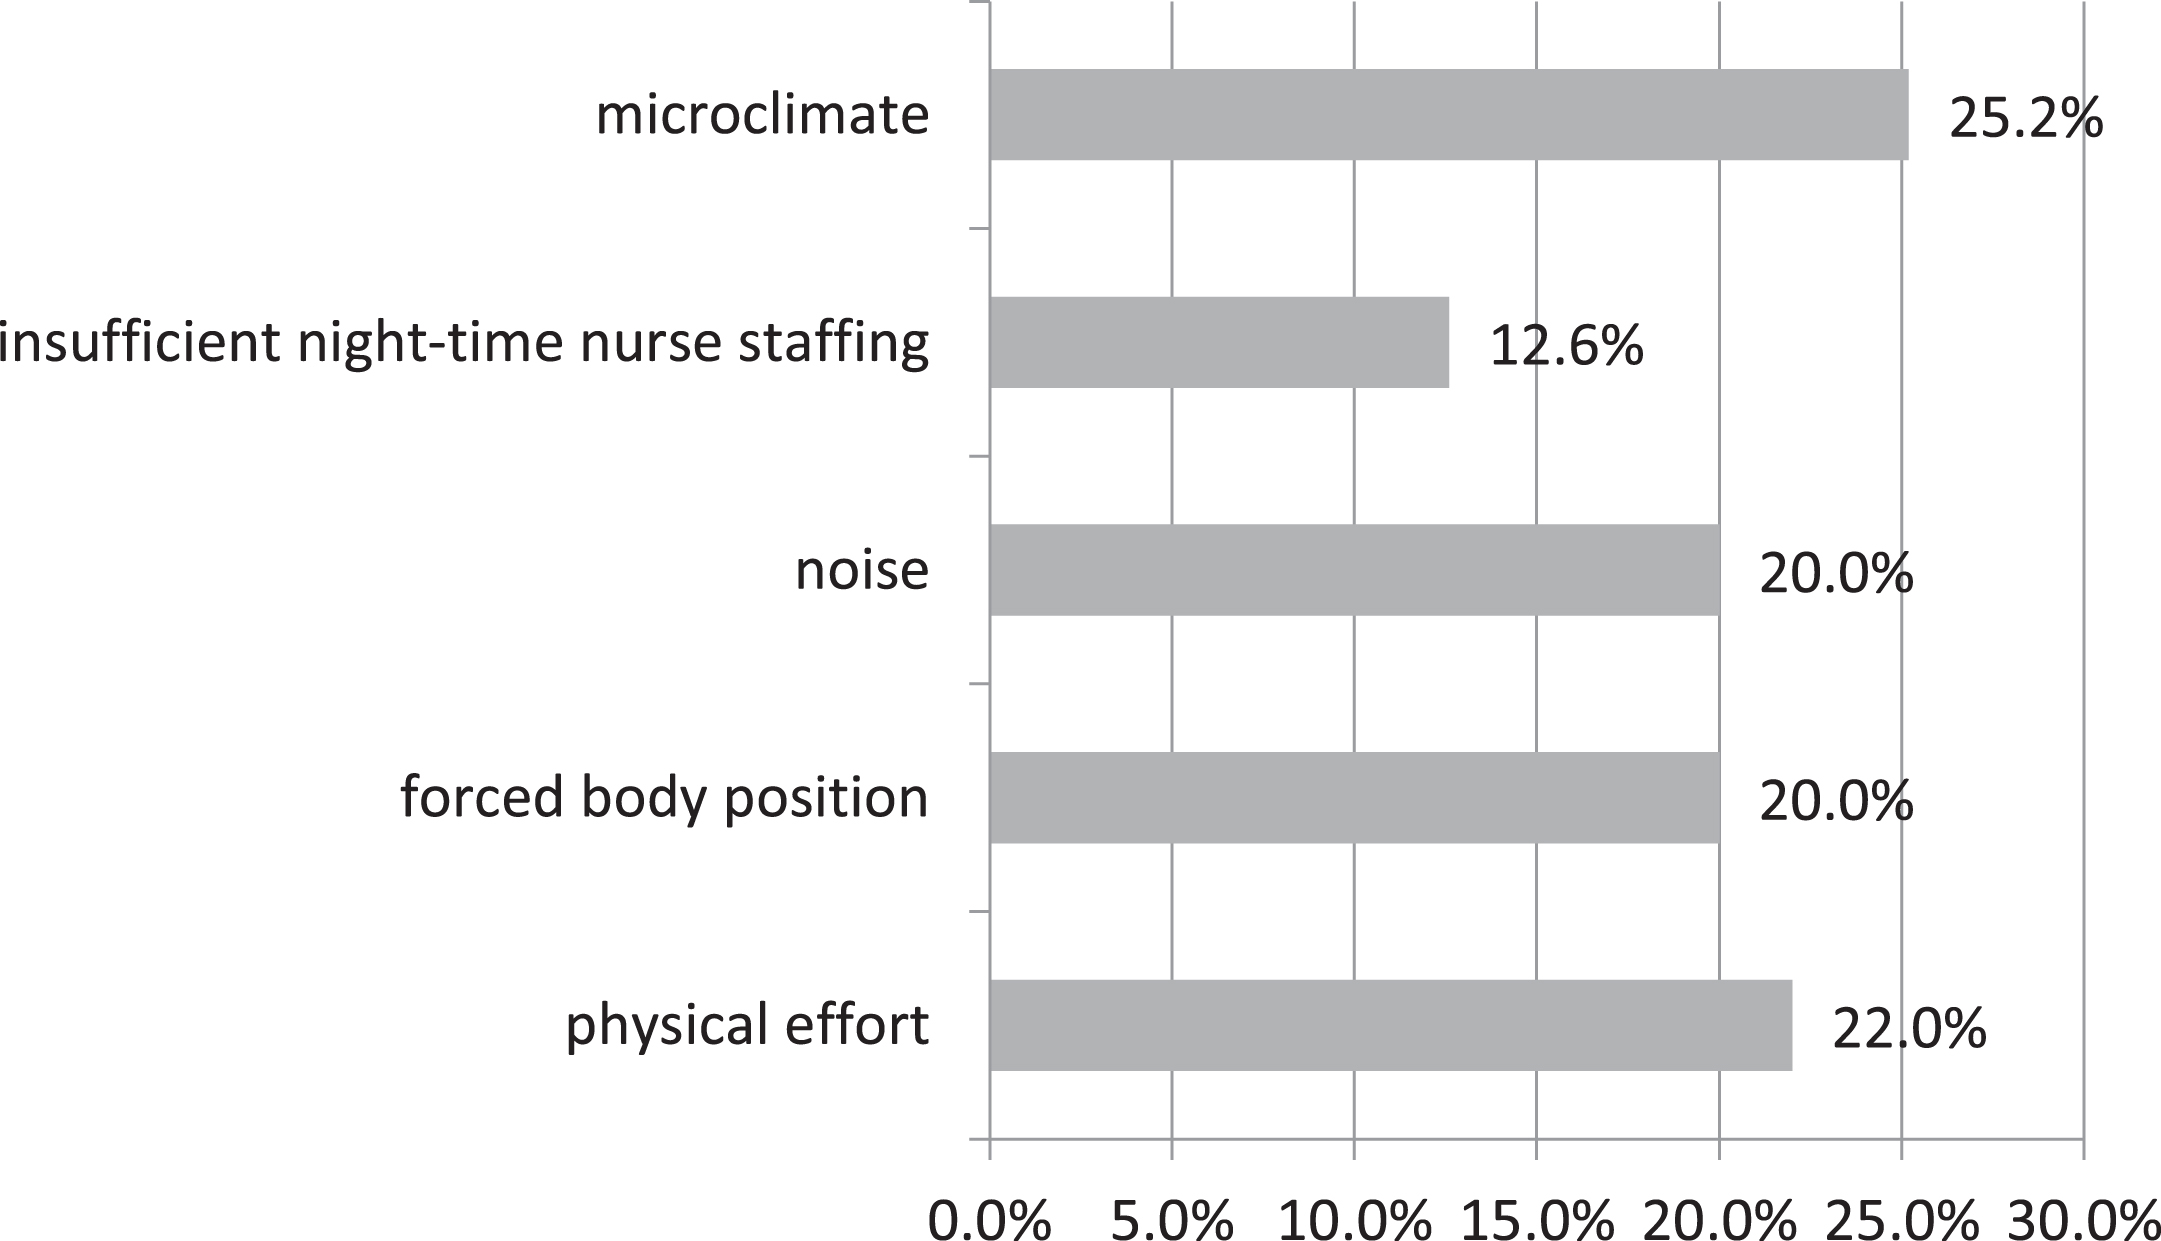 Most frequent noxious factors affecting the state of physical health occurring in shift work according to respondents’ opinions.